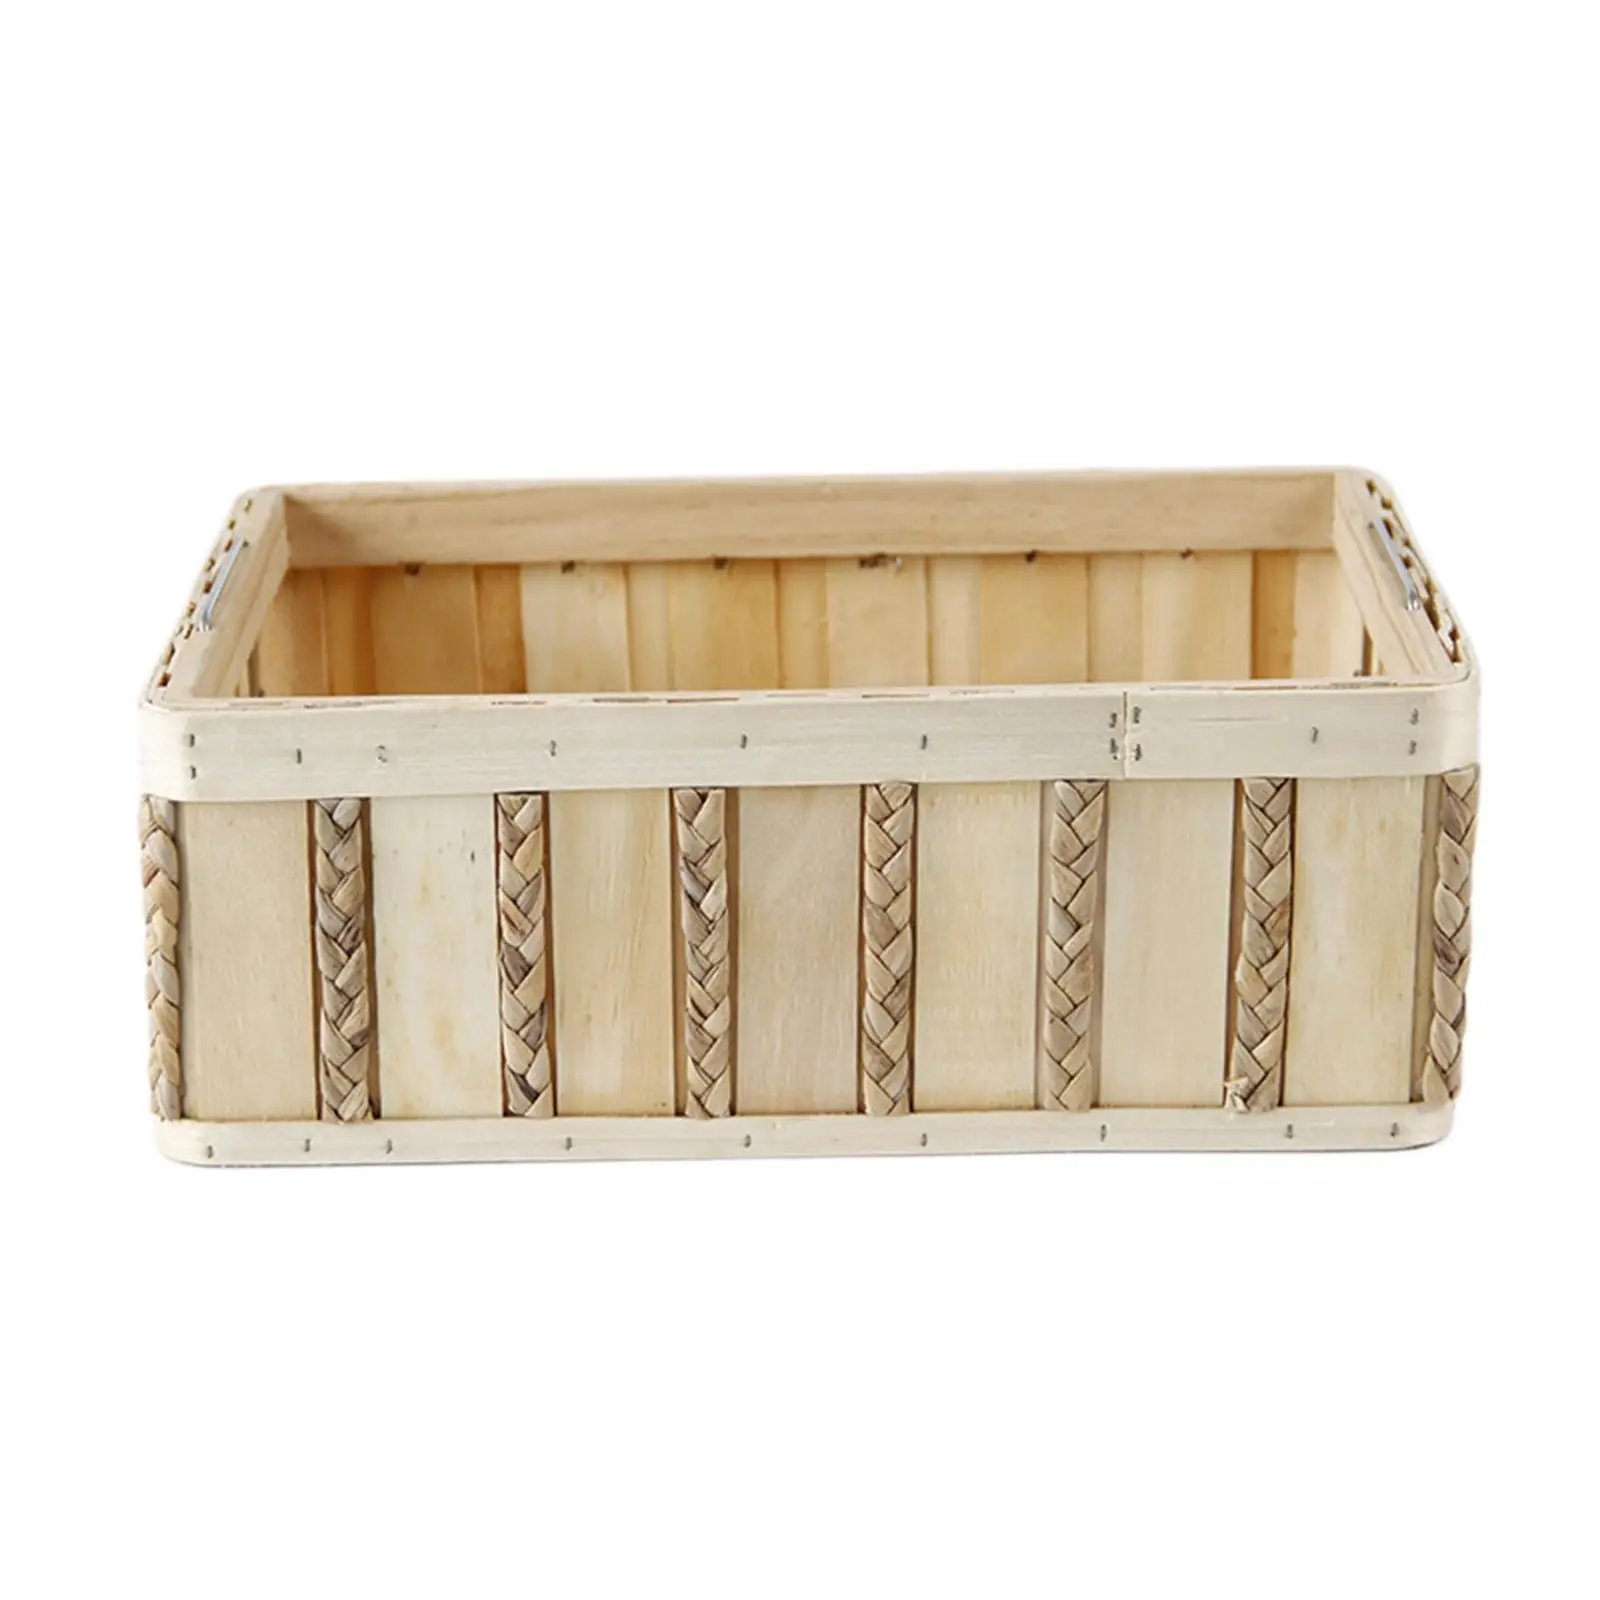 Wooden Storage Box with Handle Household Items Clothing Sundries Container Handmade Rattan Organizer Basket for Bedroom Fitments